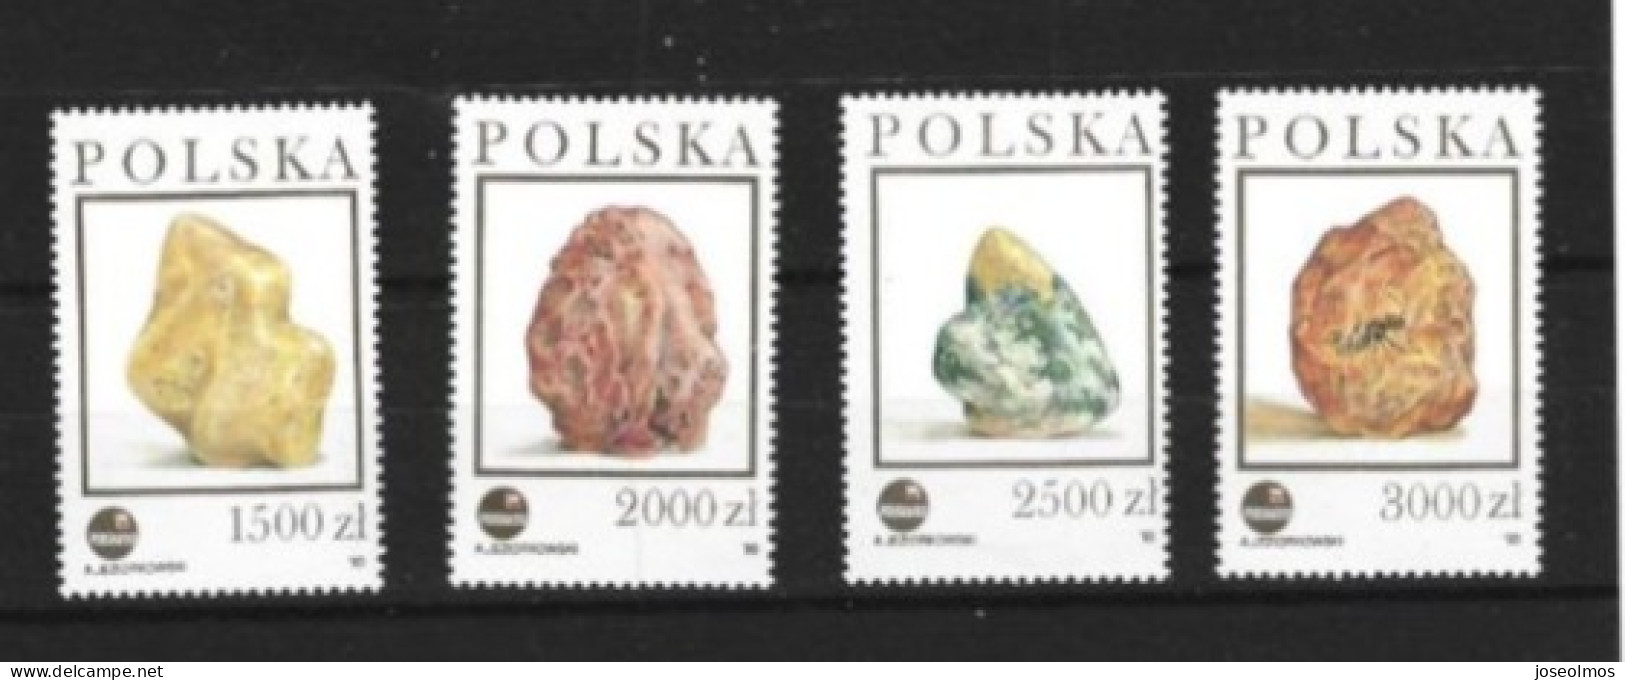 POLOGNE ANNEE 1993 N°3426-3429 MI NEUF** LUXE MNH - Unused Stamps